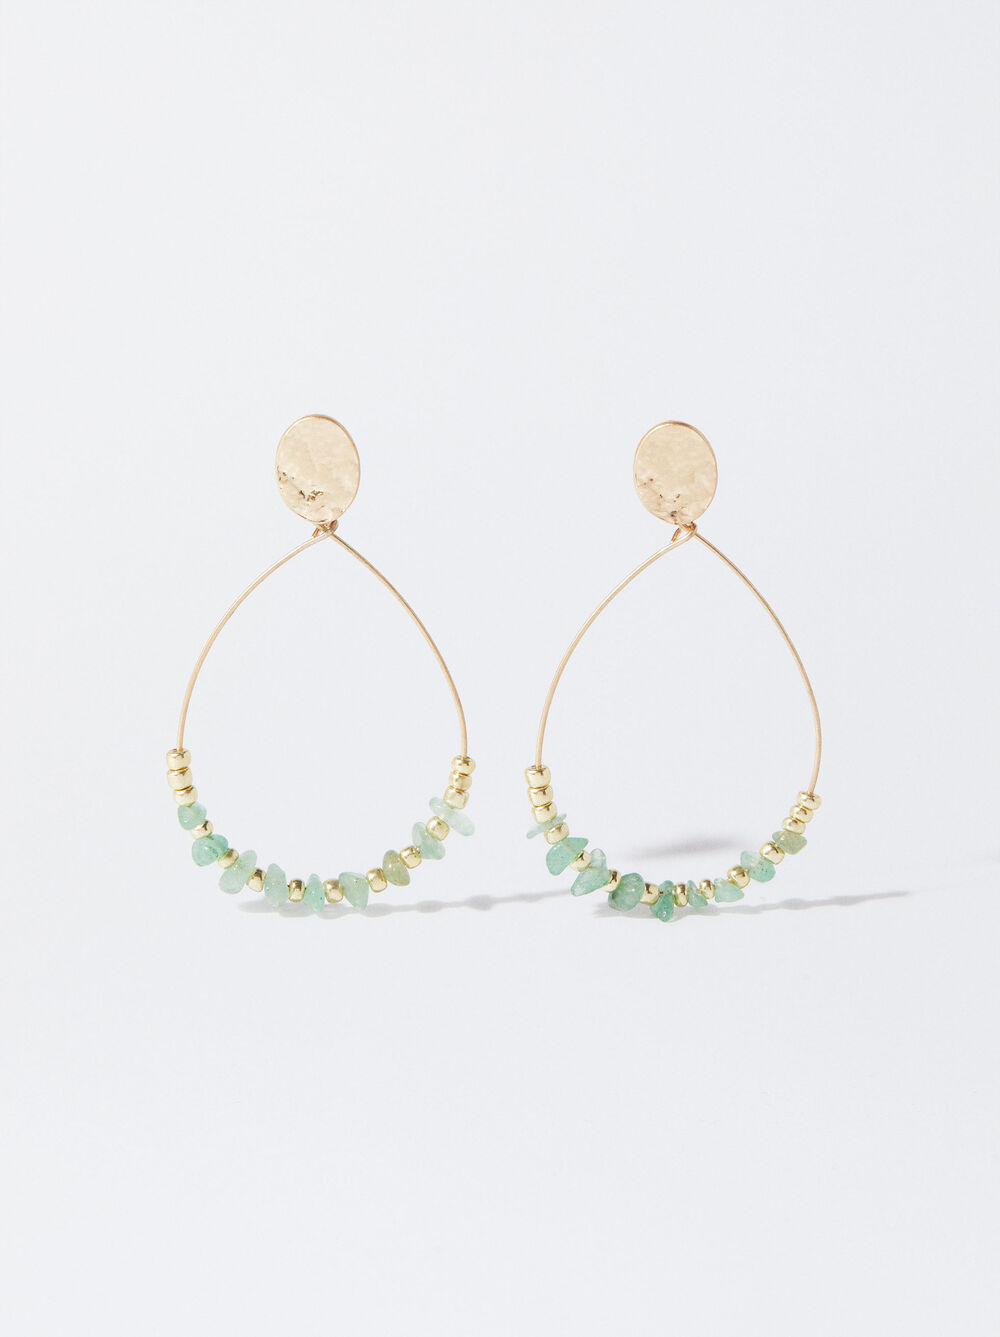 Gold-Toned Earrings With Stones image number 1.0